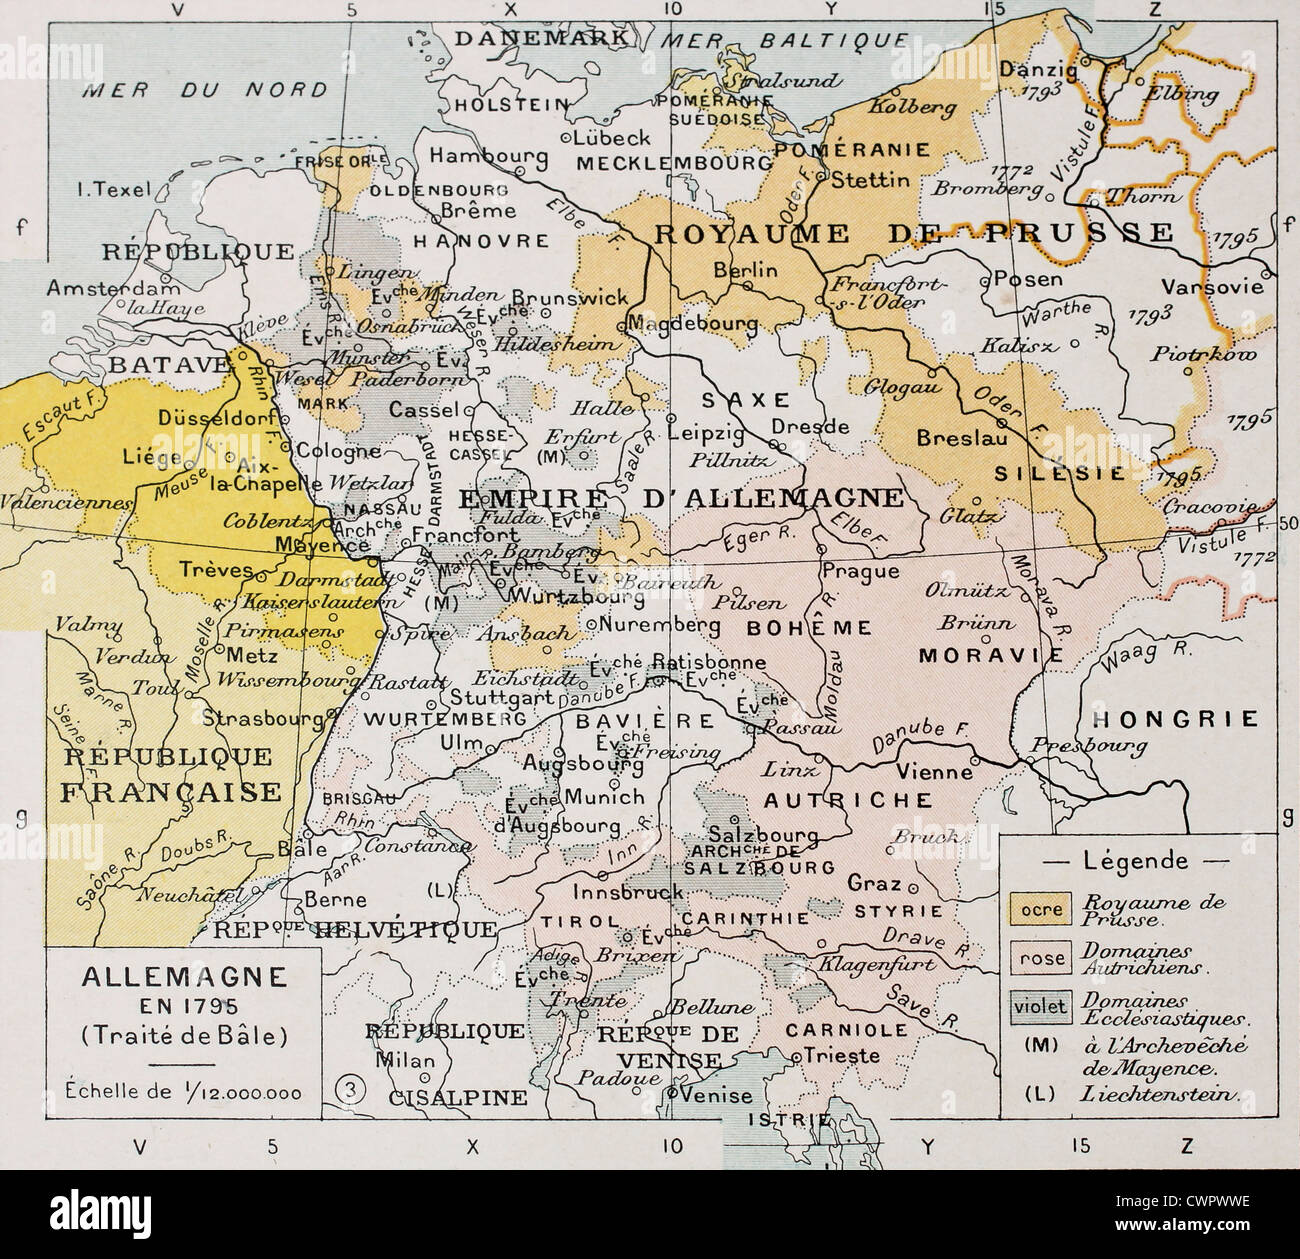 Germany in 1795 old map Stock Photo